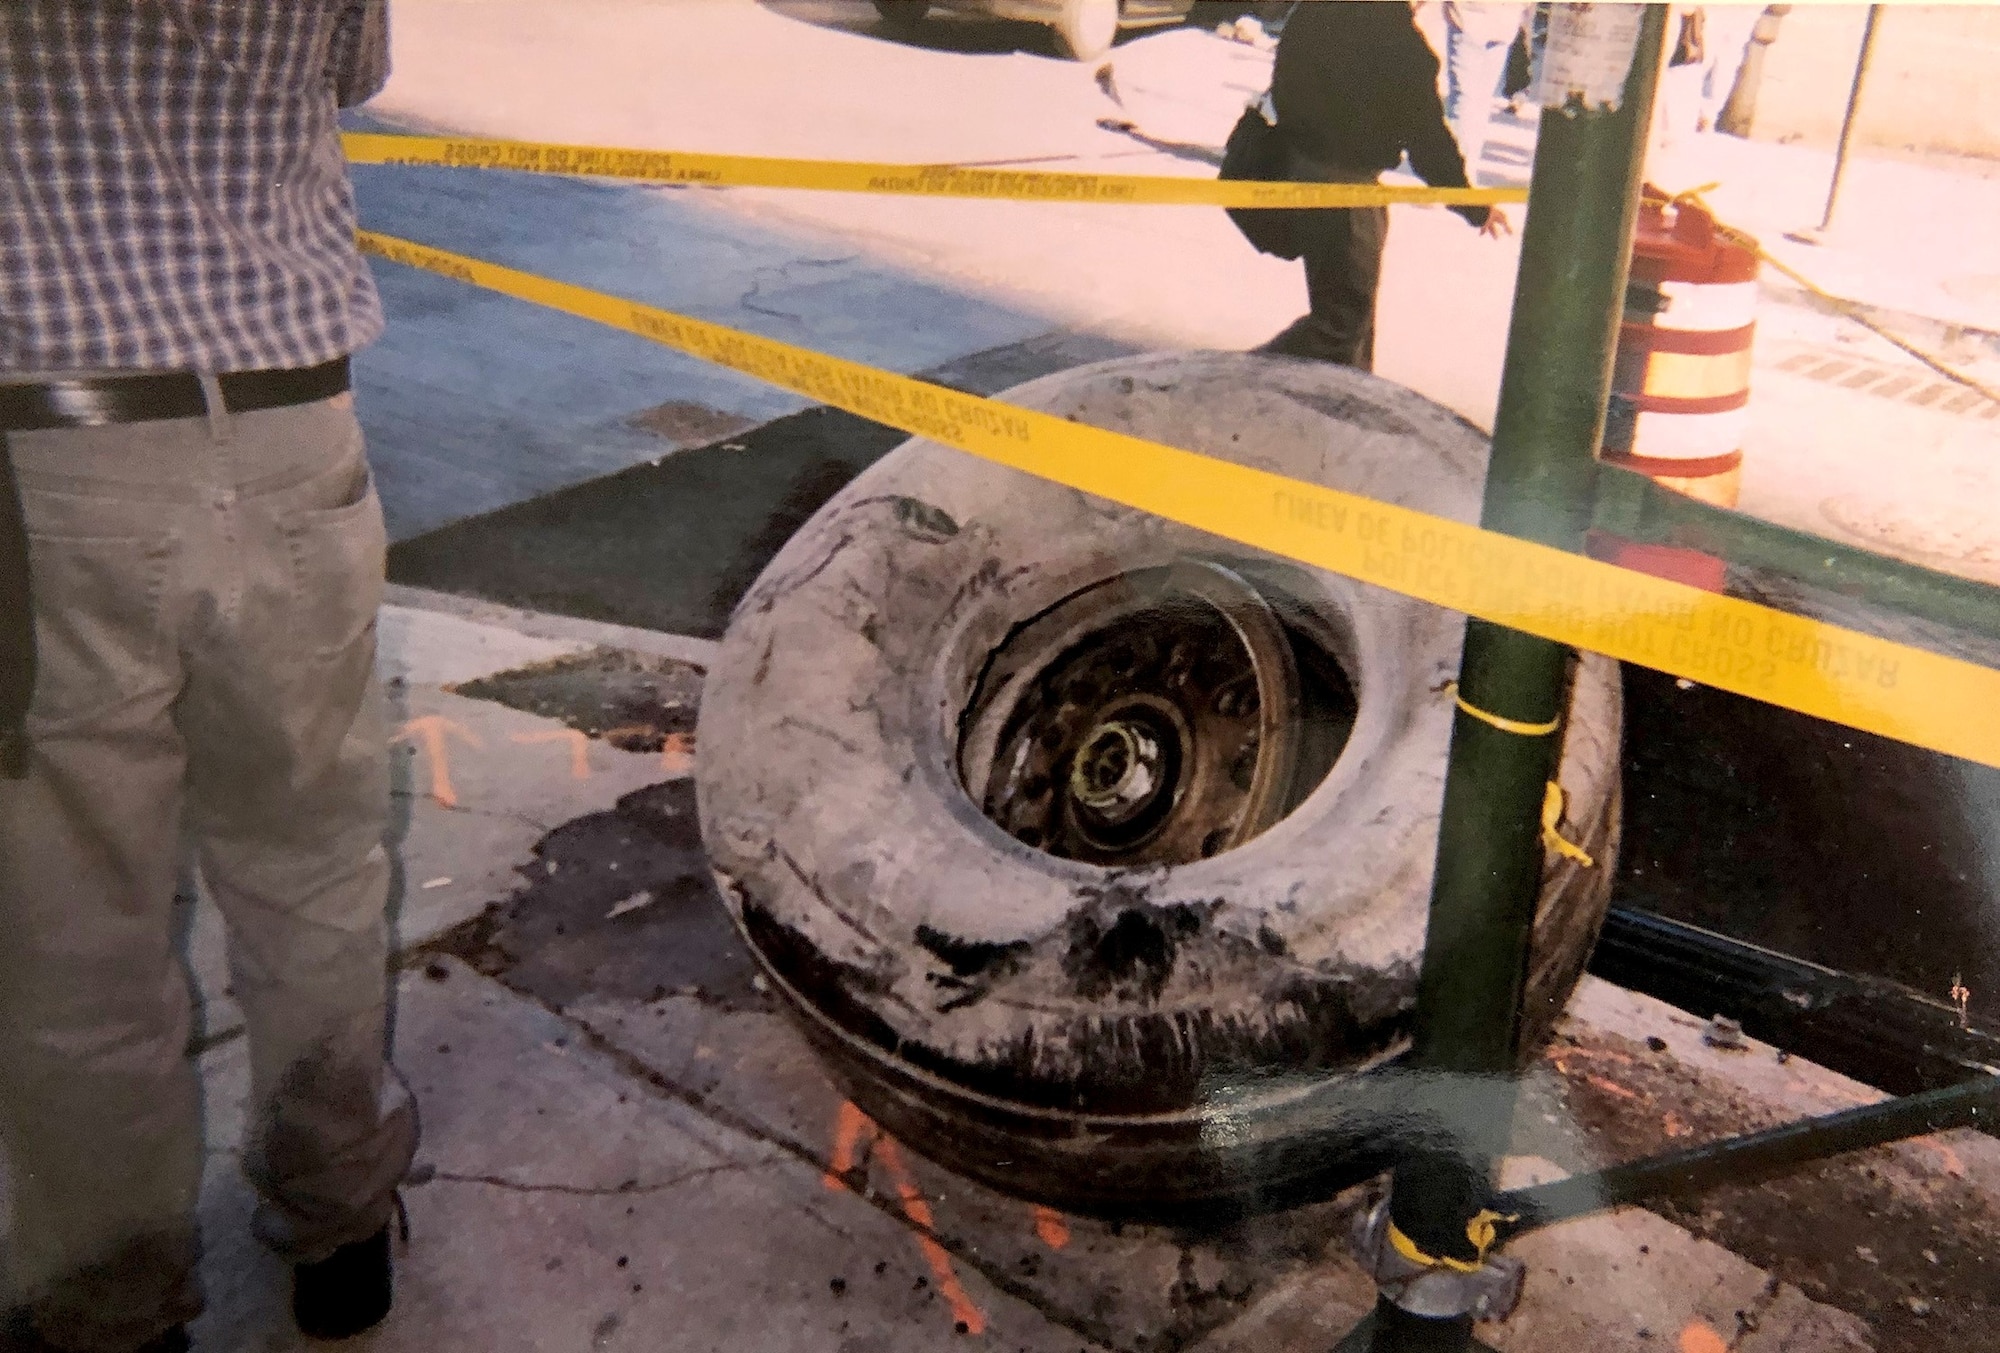 A tire from one of the aircraft that flew into one of the Twin Towers is cordoned off Sept. 11, 2001, in the street in front of the World Trade Center, New York City, New York. Col. Ephod Shang, vice commander of the 367th Recruiting Group and deputy director at the Air Force Reserve Command headquarters for Recruiting on Robins AFB, Georgia, ran towards the Twin Towers after seeing the smoke from the first crash to help people and photograph the events around him which he saw as a priority from his experience as a Reserve Citizen Airman intelligence officer. (Courtesy photo by Col. Ephod Shang)